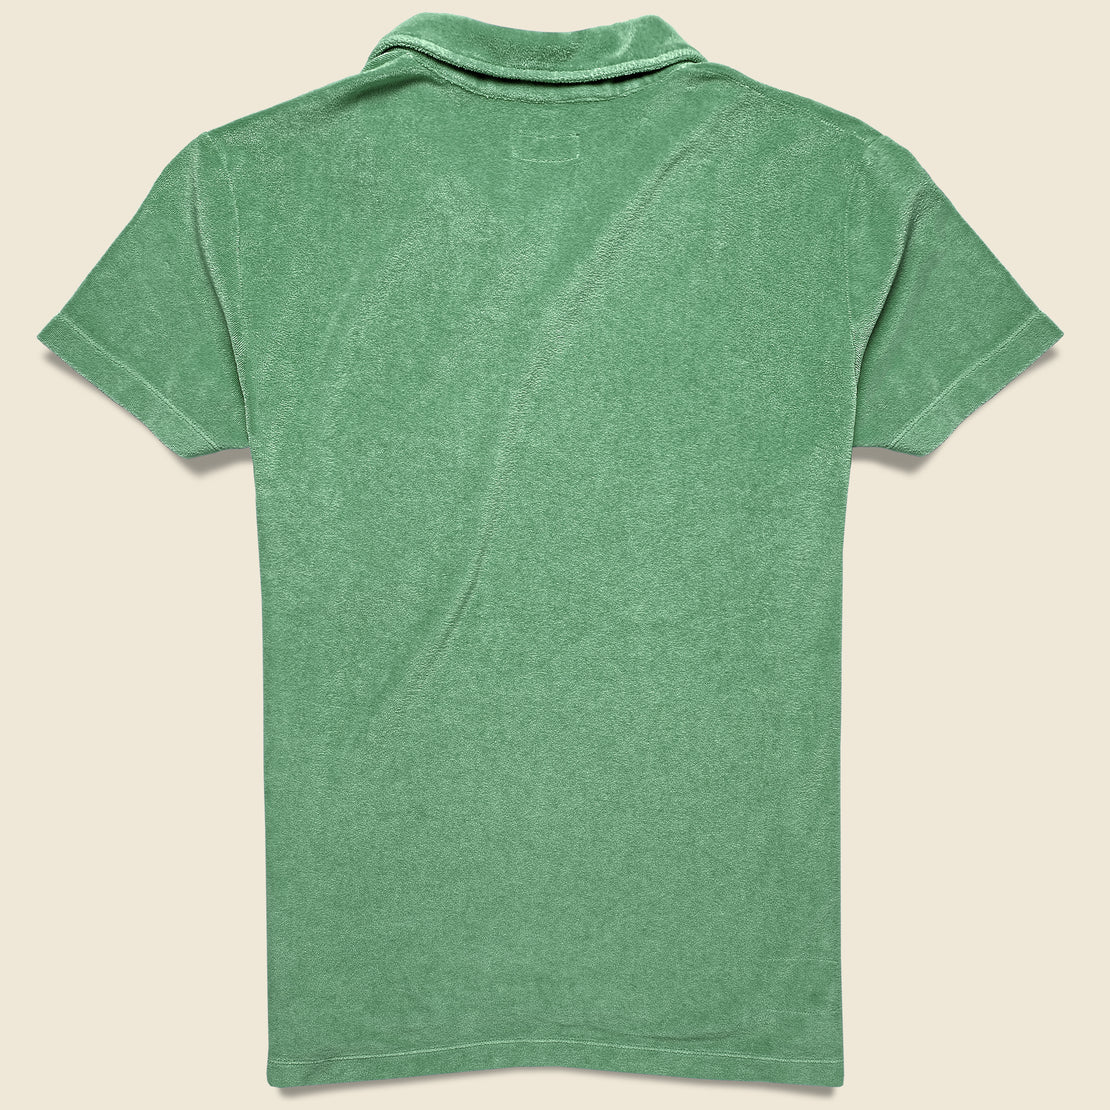 Terry Fleece Vacation Polo - Green - Universal Works - STAG Provisions - Tops - S/S Knit